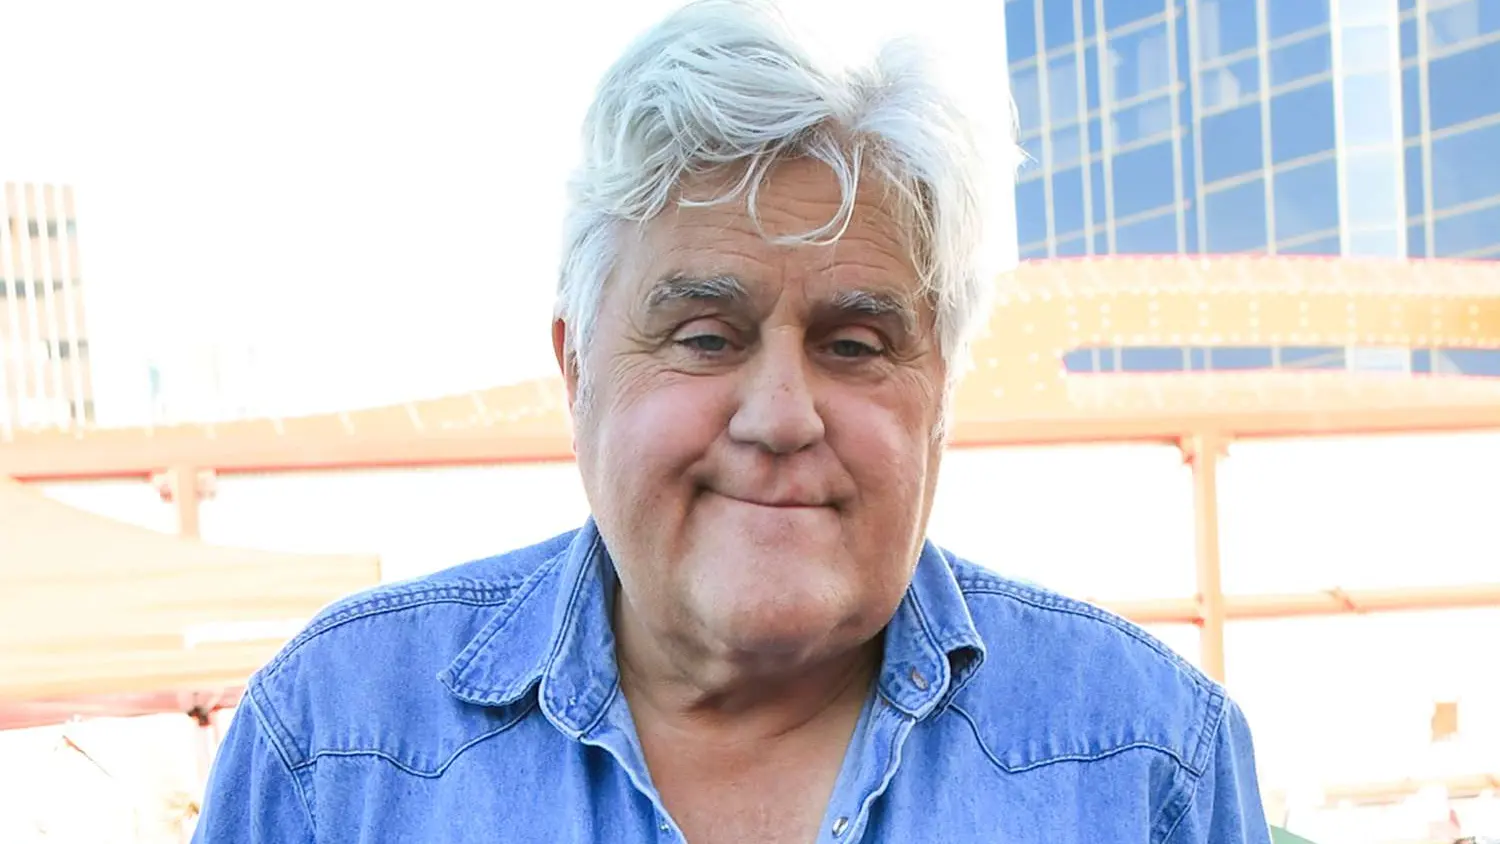 Jay Leno suffered severe burn-related injuries two weeks ago.